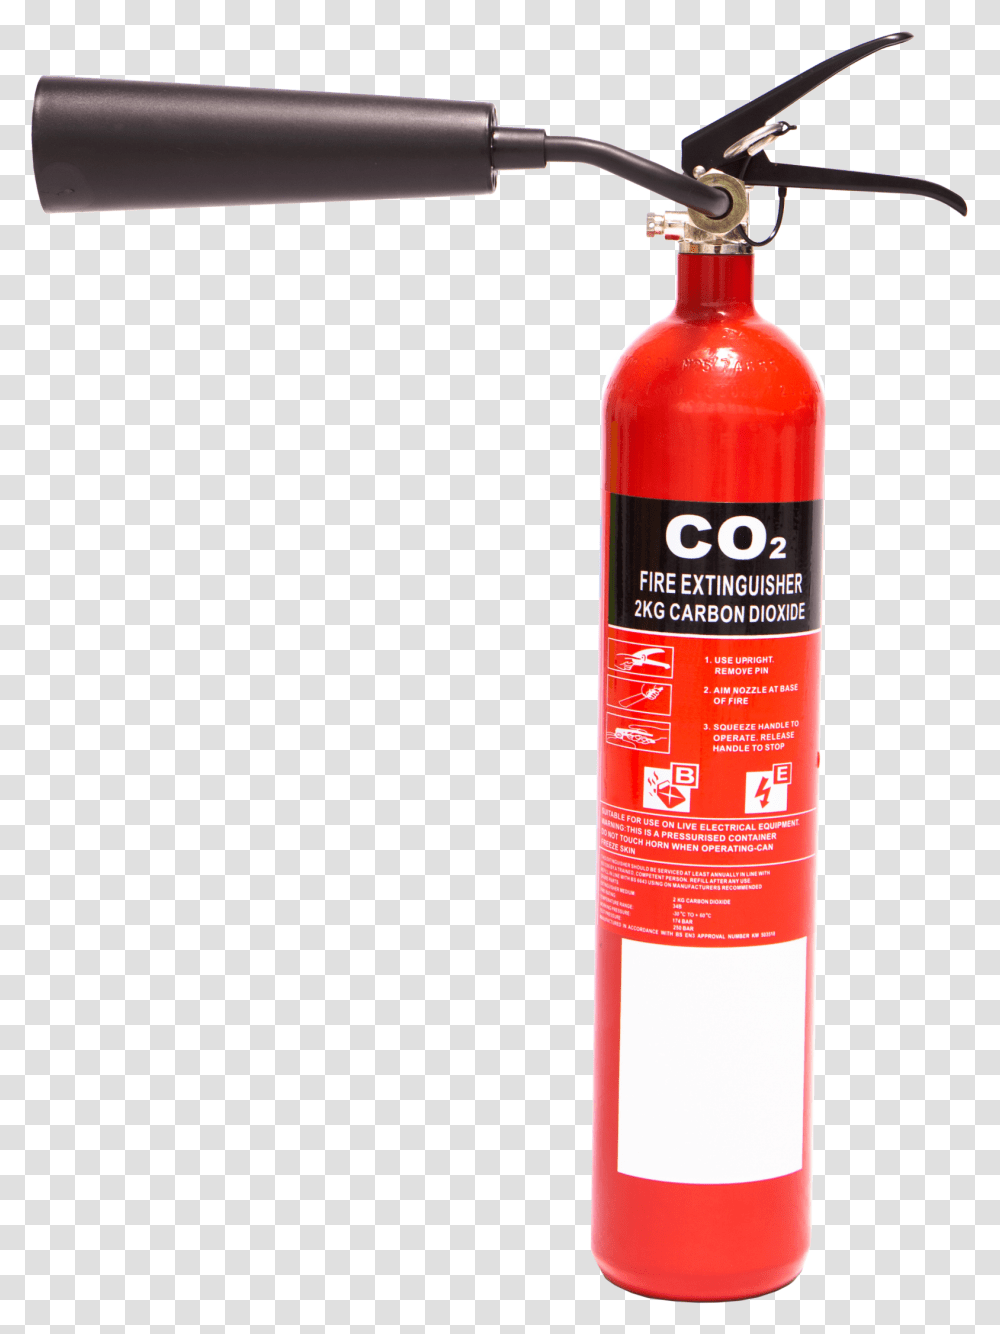 Now You Can Extinguisher Icon Clipart Fire Extinguisher, Cylinder, Aluminium, Spray Can, Bottle Transparent Png